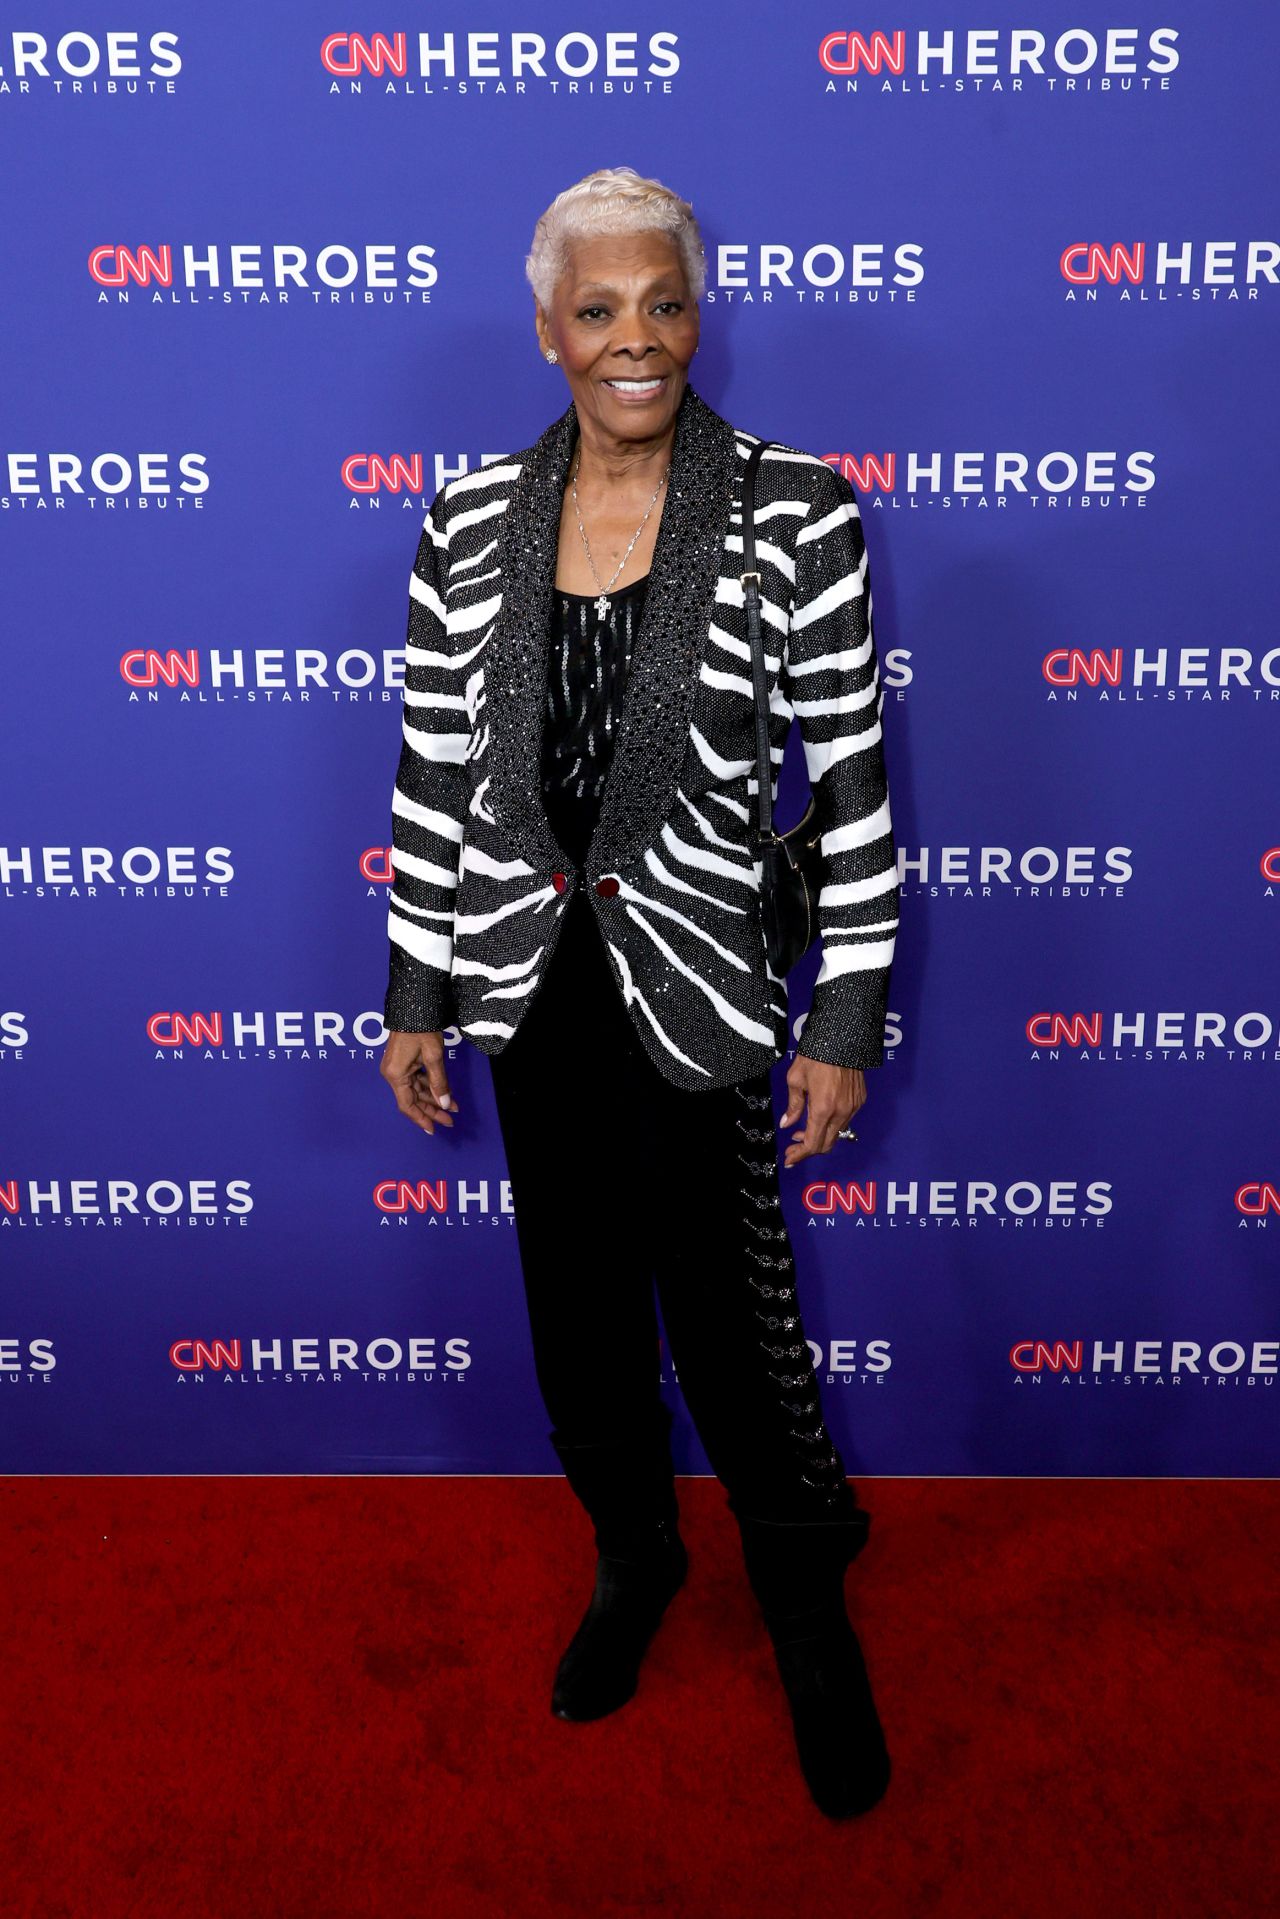 Dionne Warwick arrives on the event's red carpet.